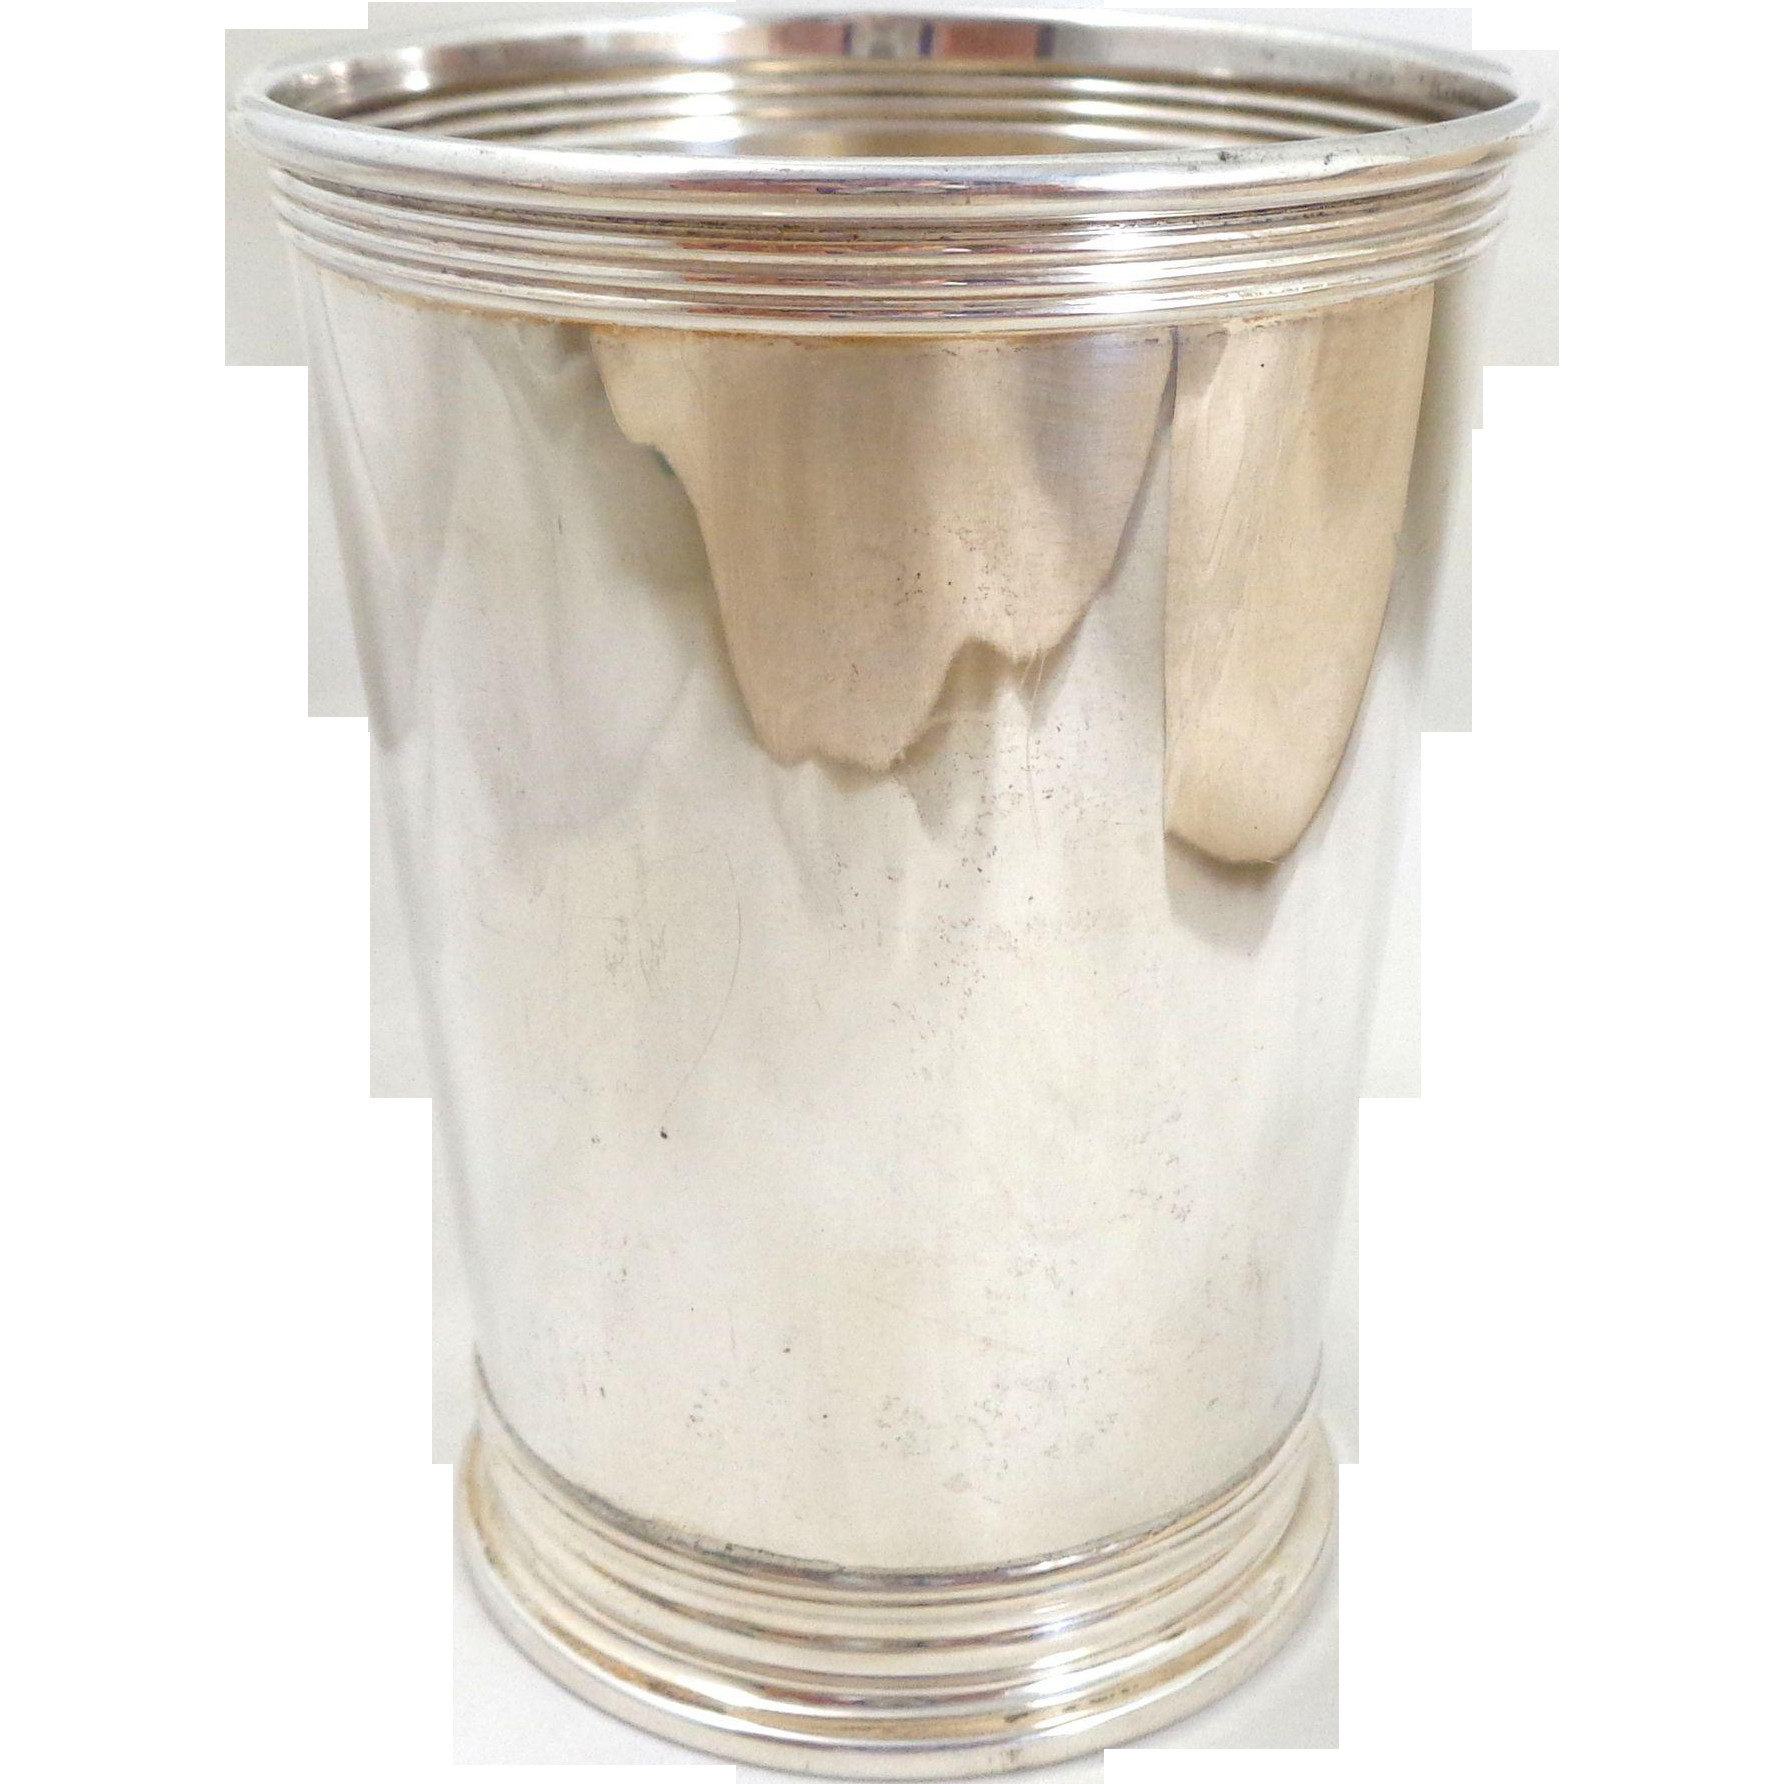 16 Popular Mint Julep Cup Vases wholesale 2023 free download mint julep cup vases wholesale of vintage newport sterling silver 1660 mint julep cup river road with vintage newport sterling silver 1660 mint julep cup river road collectibles ruby lane